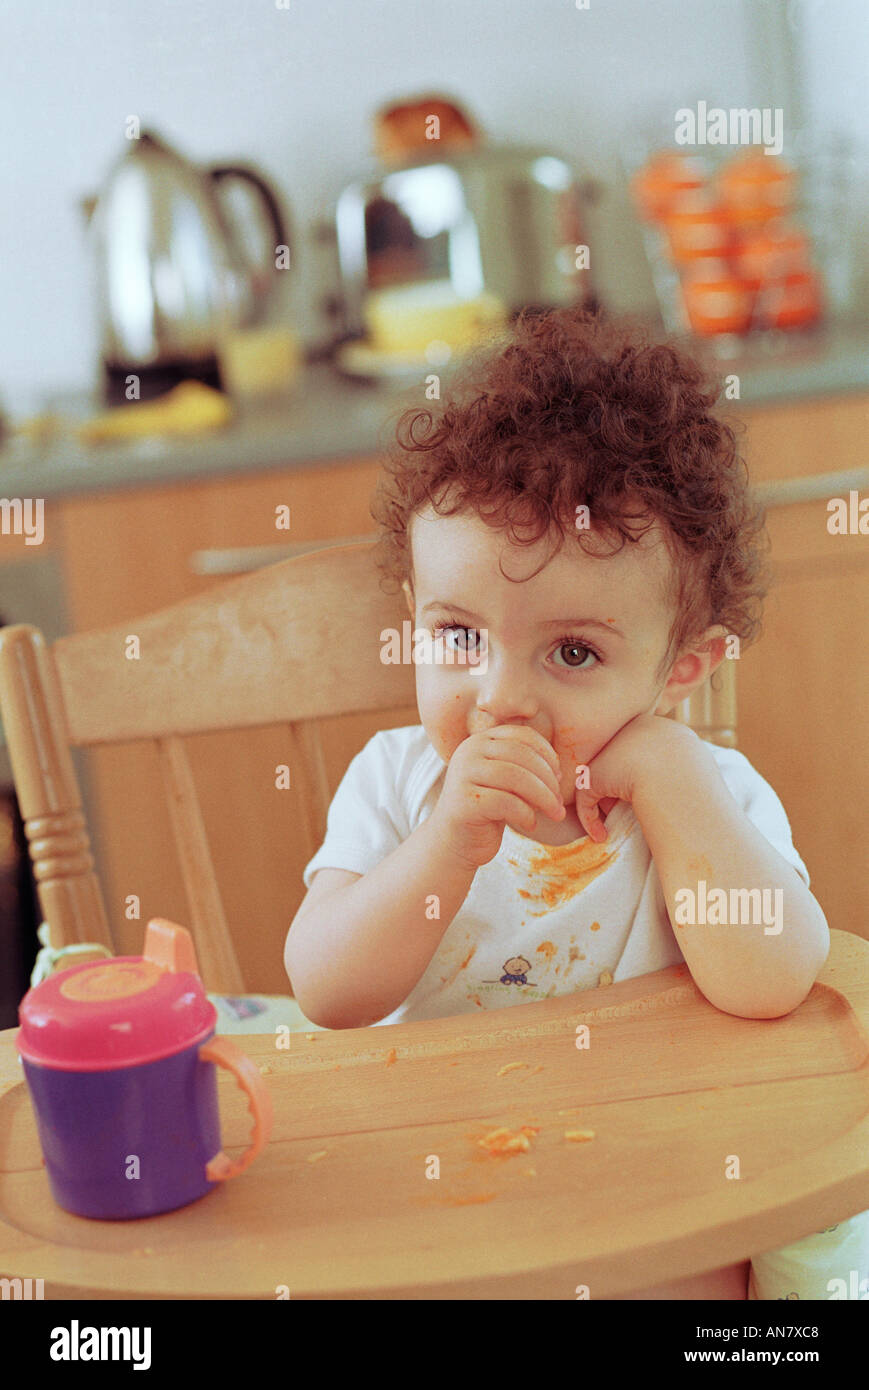 1 Year Old Baby In High Chair Stock Photo 5041863 Alamy